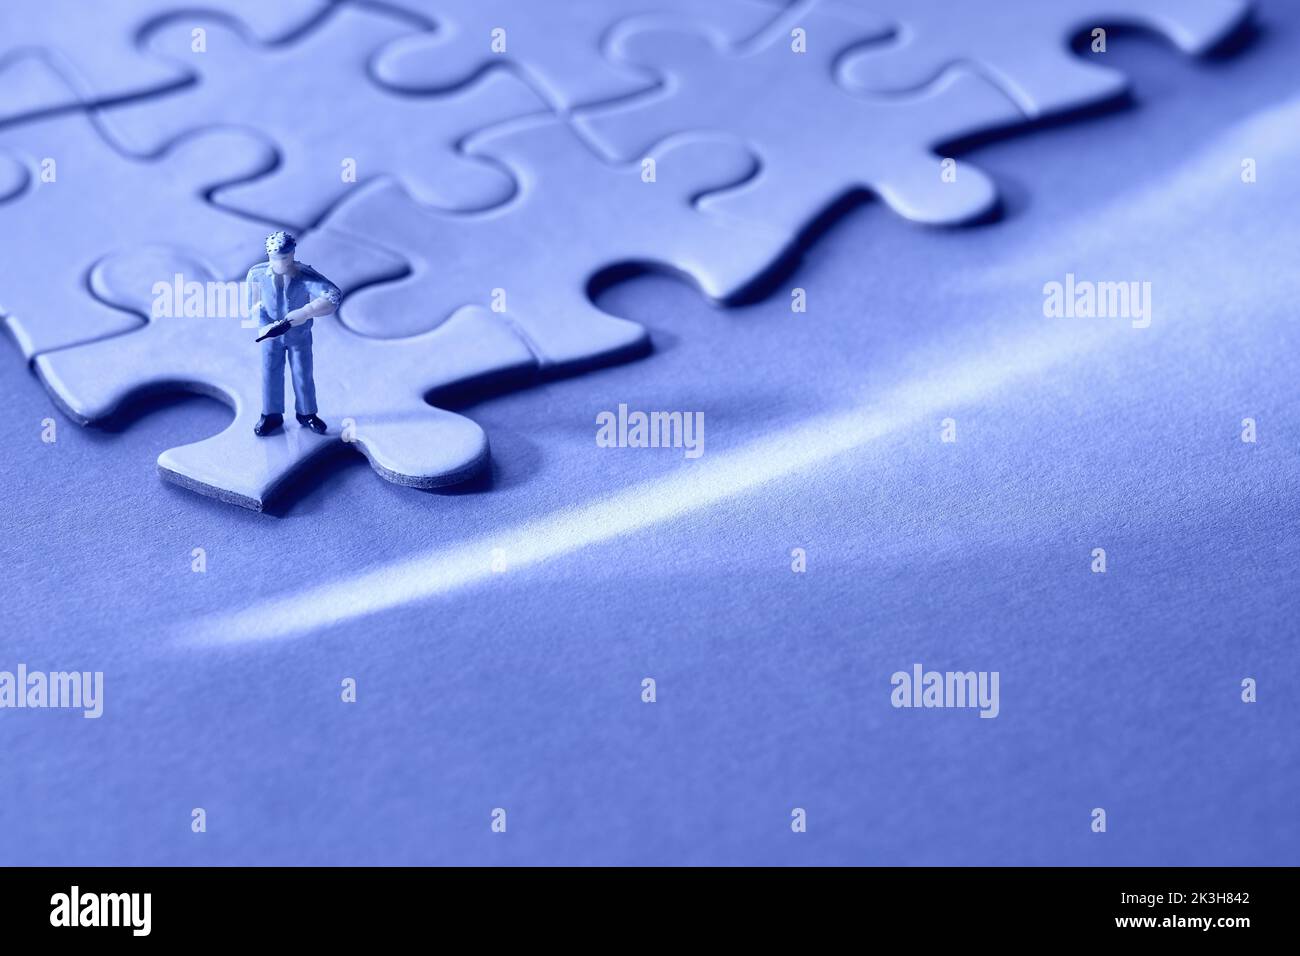 Concept of quiet quitting, job burnout, depression. Blue monochrome background. Single tiny worker miniature figure on edge of linked jigsaw puzzle Stock Photo